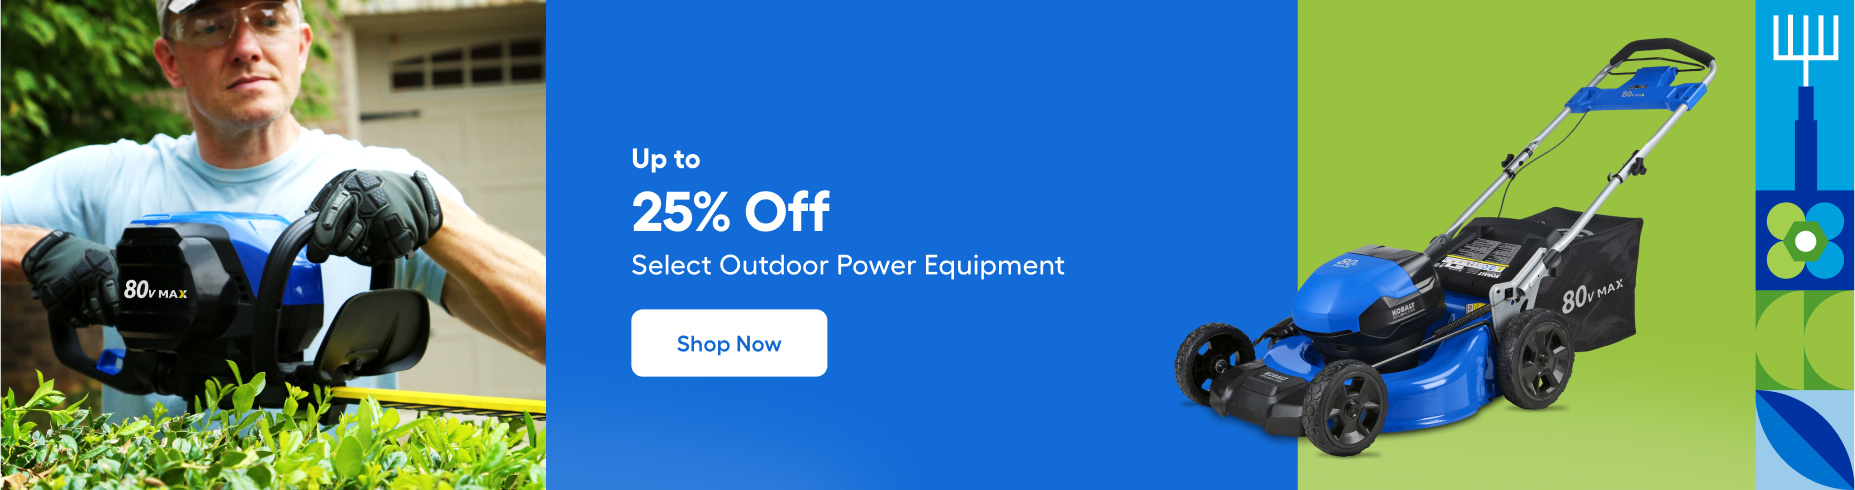 Lawn & Outdoor Equipment Shipping Rates & Services